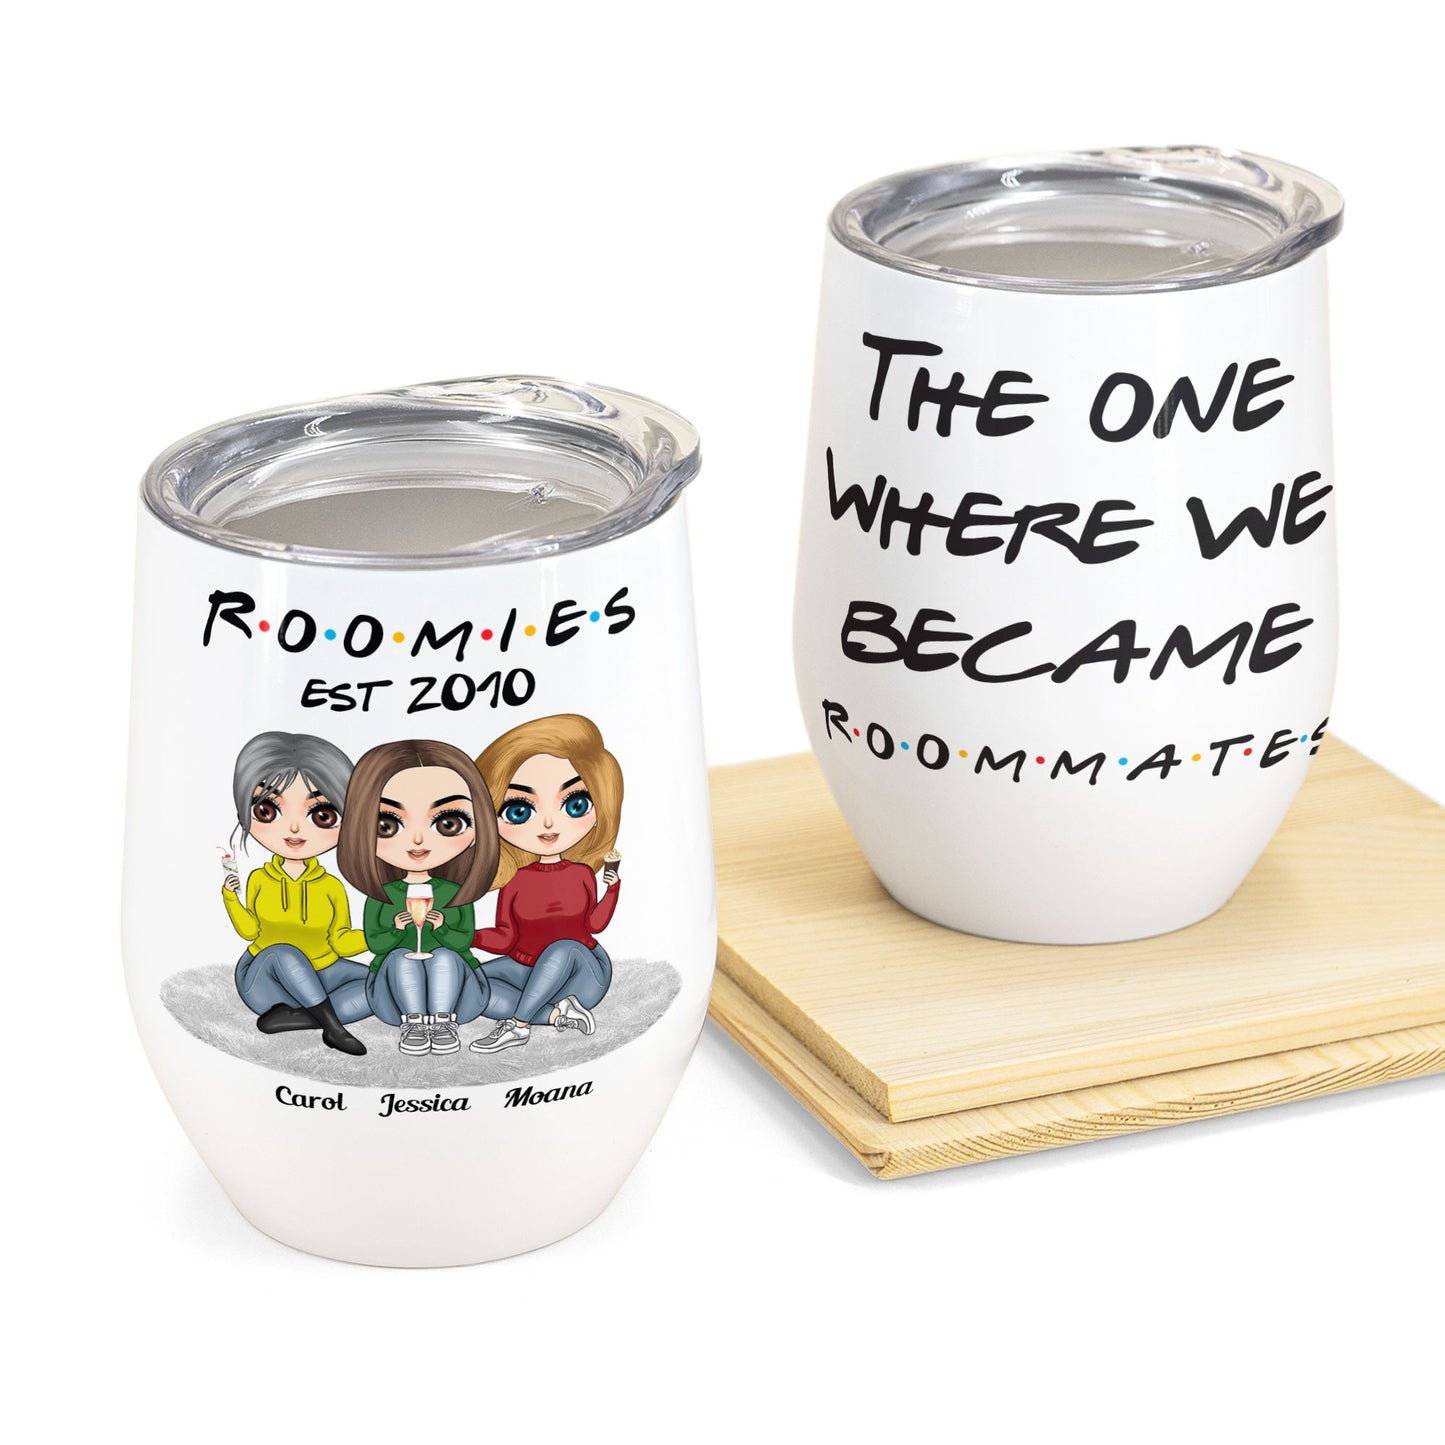 The One Where We Became Roommates - Personalized Wine Tumbler - Birthday Gift For Friends, BFF, Besties, Roomies, Roomates - Cute Cartoon Girls